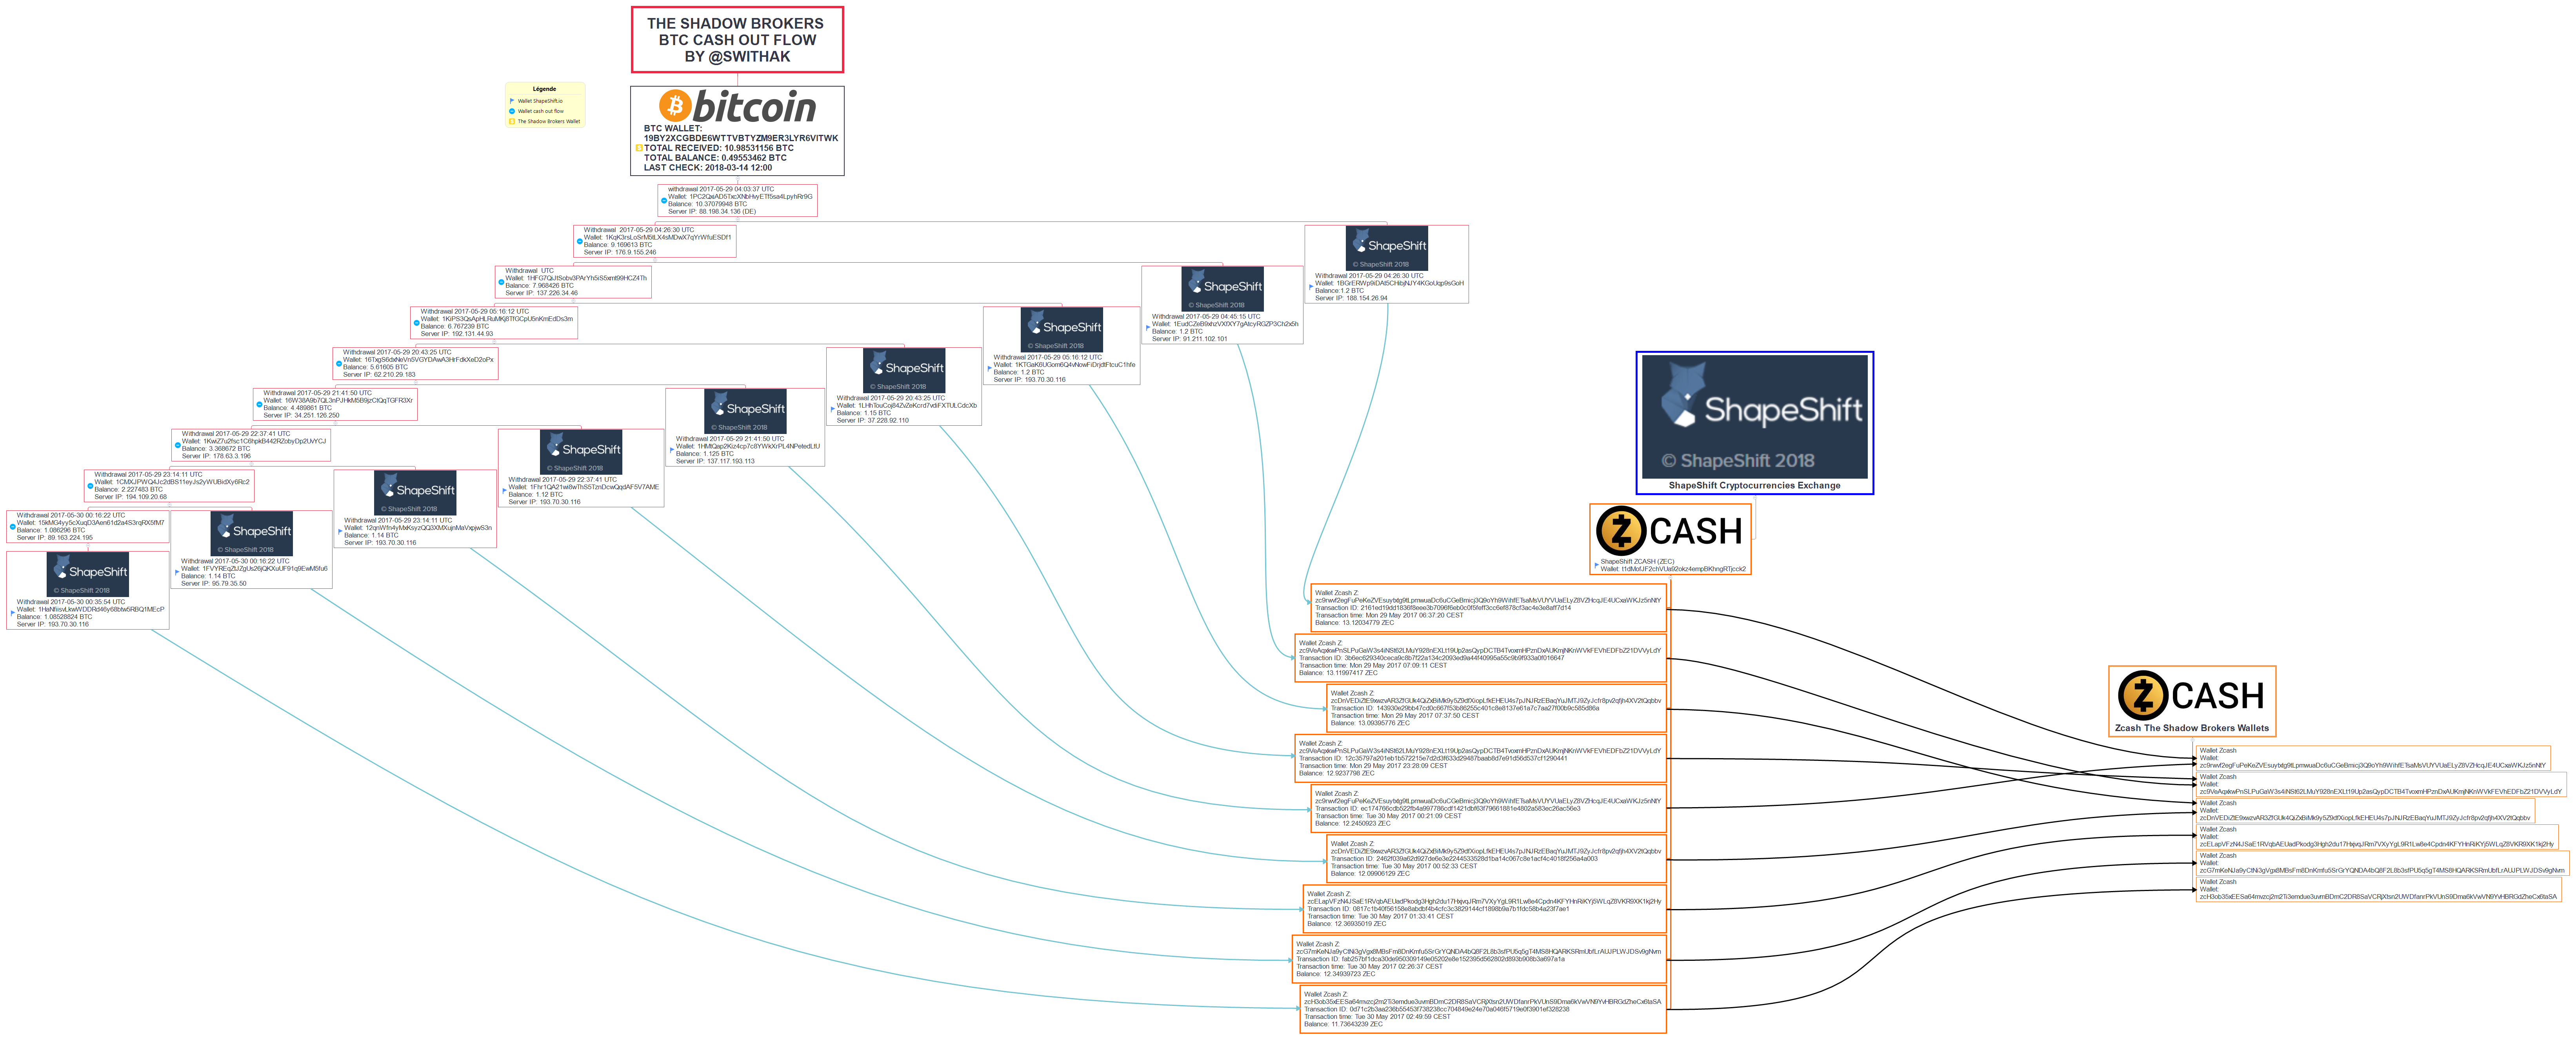 The-Shadow-Brokers-BTC-Cash-Out-Flow_STEP3_By-SwitHak